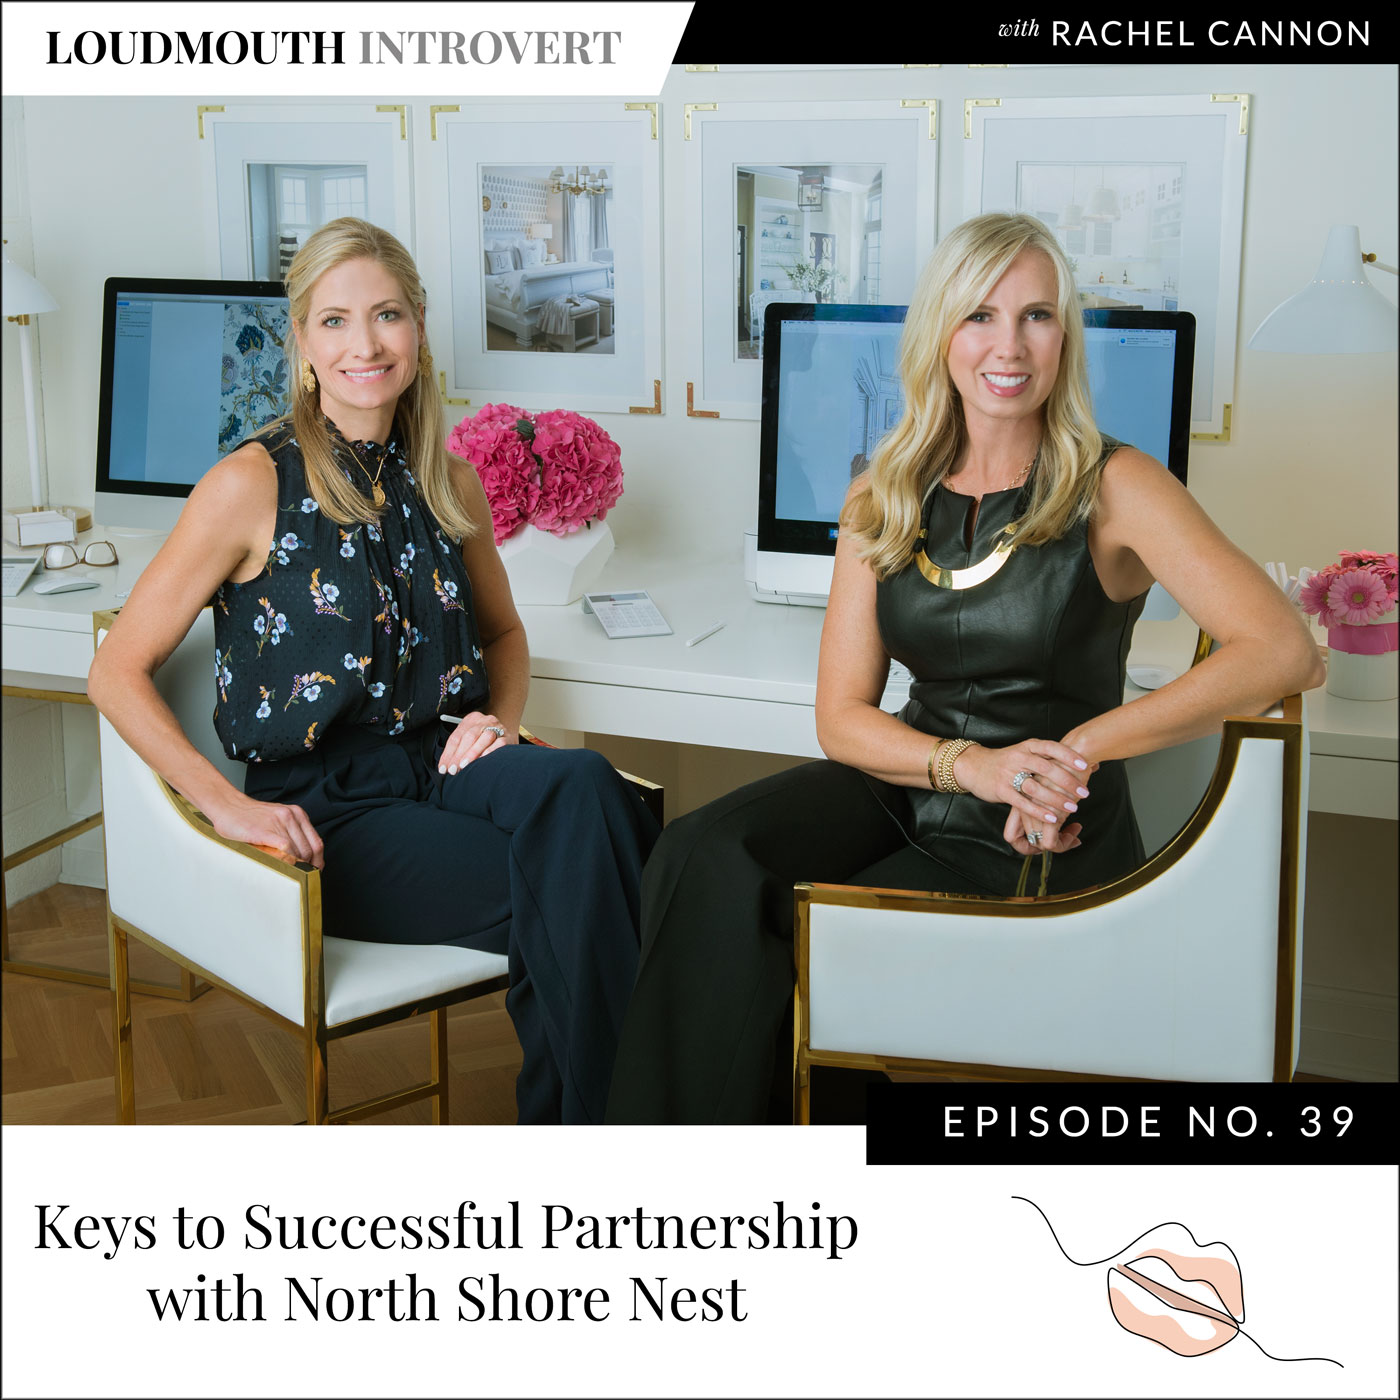 Keys to Successful Partnership with North Shore Nest